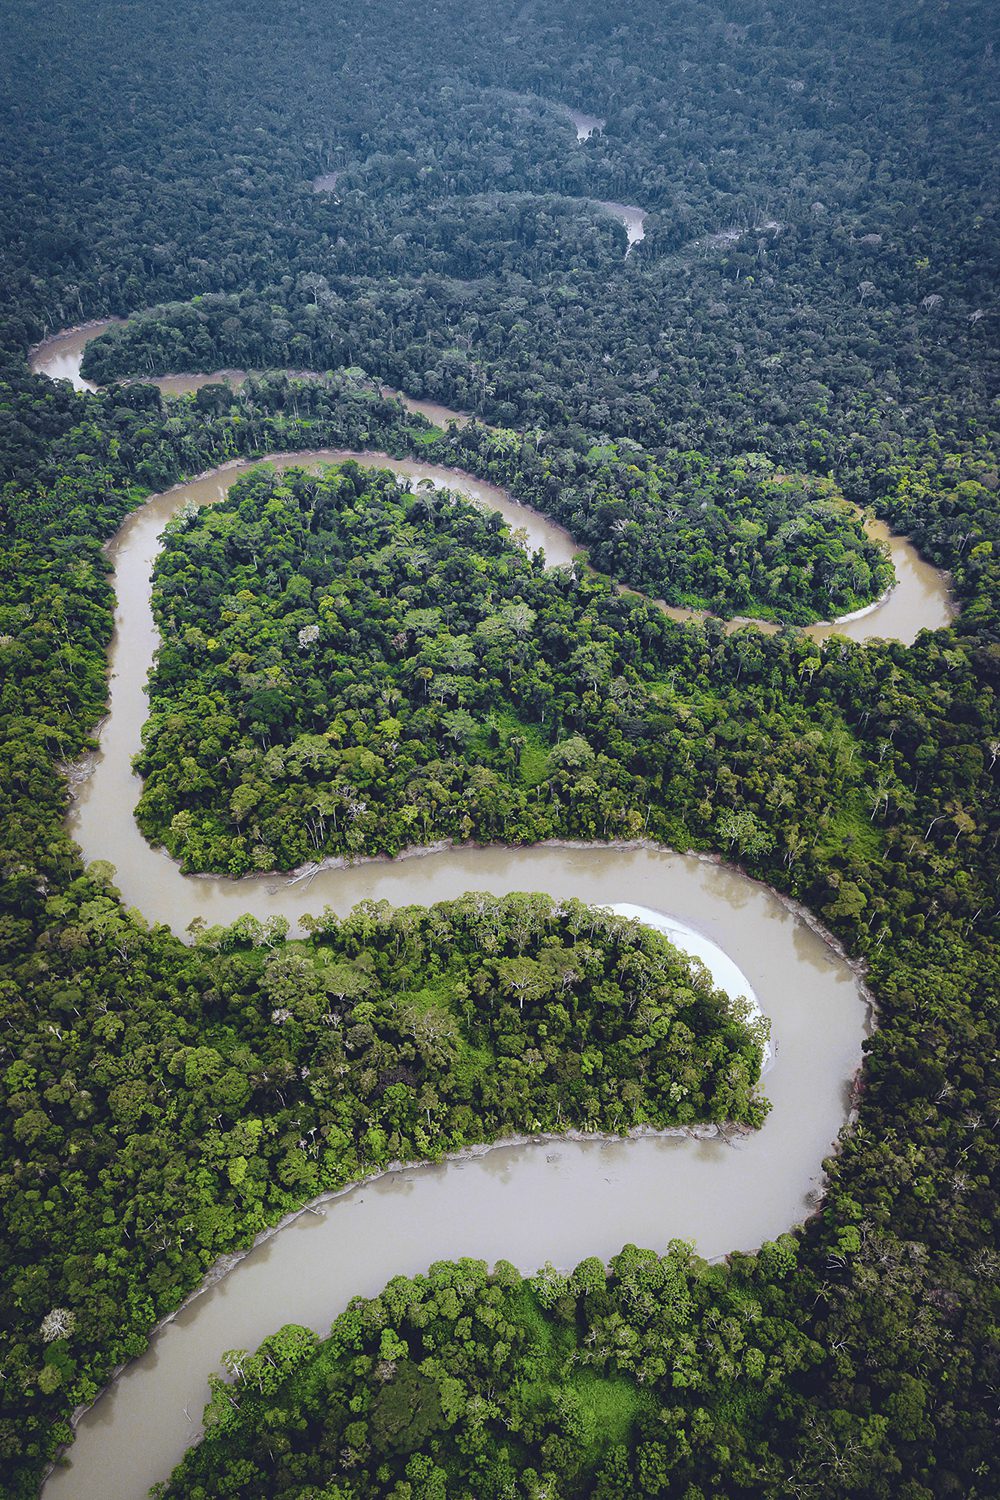 Virgin Forest - Xingu Basin: The current formation of the forest is a direct result of human action -